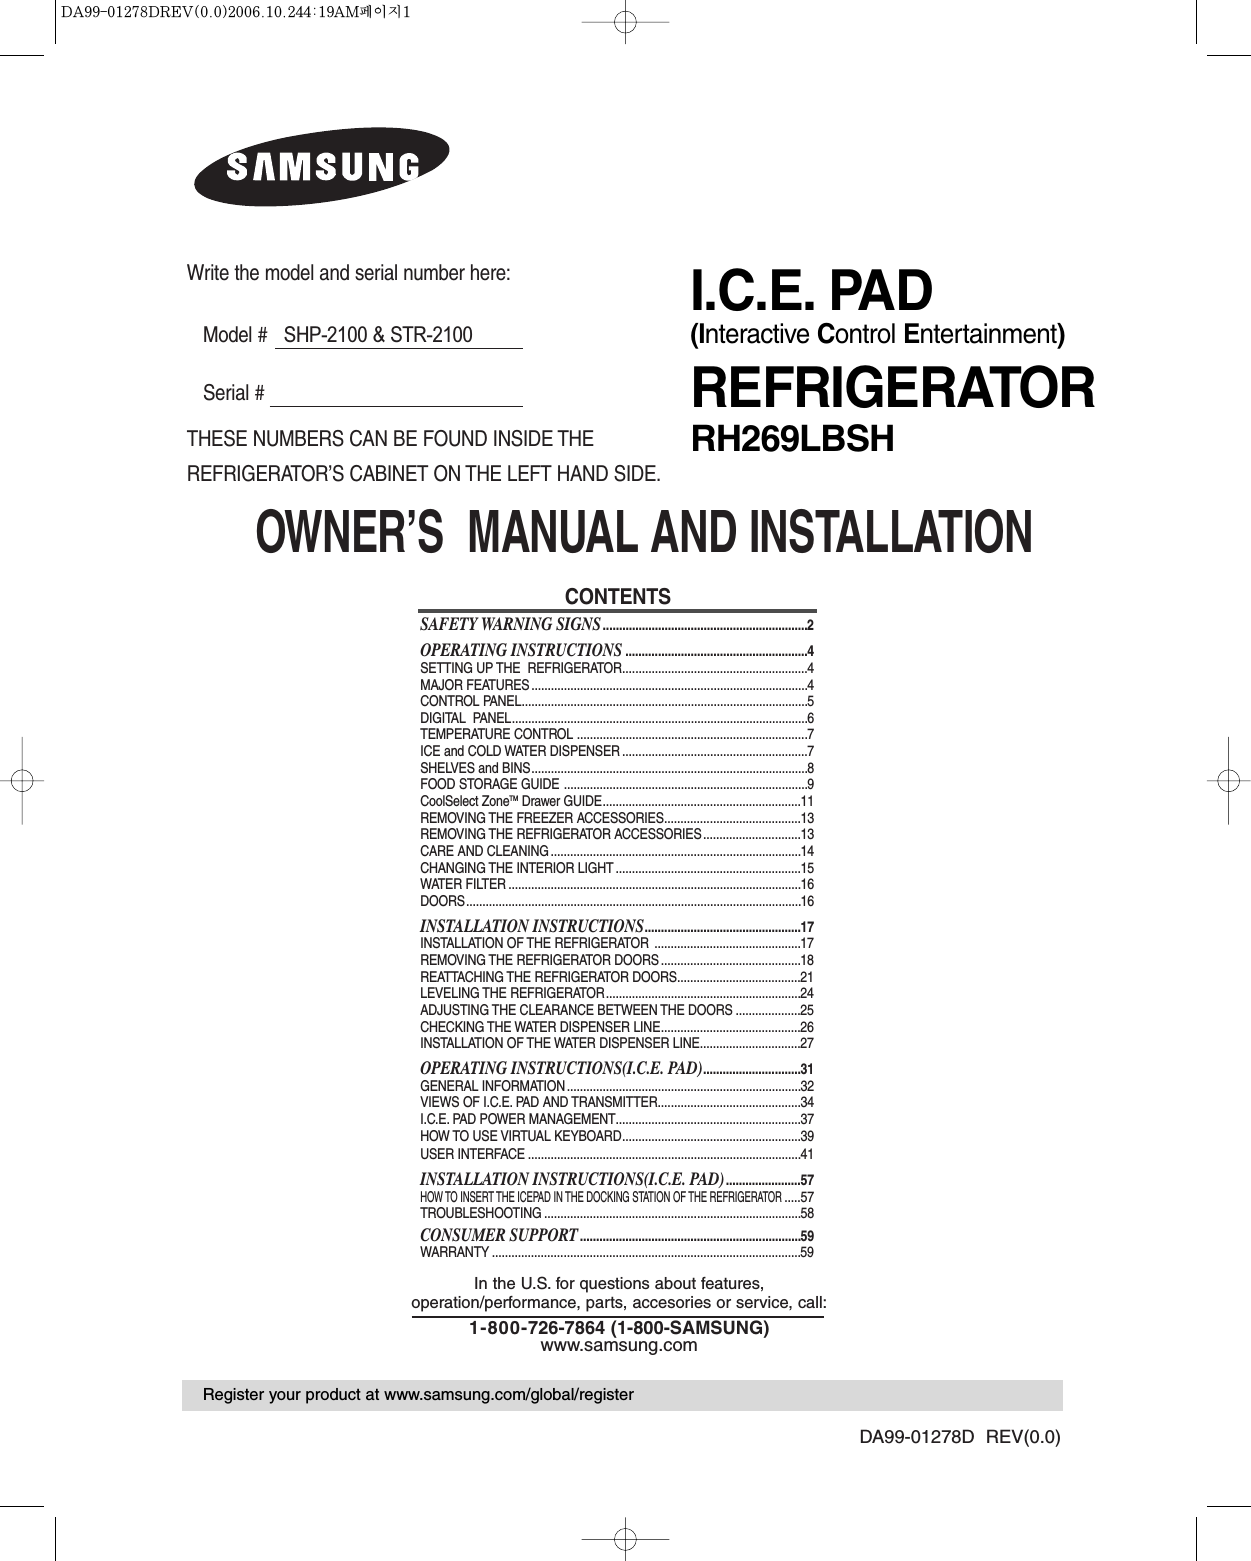 OWNER’S  MANUAL AND INSTALLATIONDA99-01278D  REV(0.0)CONTENTSSAFETY WARNING SIGNS...............................................................2OPERATING INSTRUCTIONS........................................................4SETTING UP THE  REFRIGERATOR.........................................................4MAJOR FEATURES .....................................................................................4CONTROL PANEL........................................................................................5DIGITAL  PANEL...........................................................................................6TEMPERATURE CONTROL .......................................................................7ICE and COLD WATER DISPENSER .........................................................7SHELVES and BINS.....................................................................................8FOOD STORAGE GUIDE ...........................................................................9CoolSelect ZoneTM Drawer GUIDE.............................................................11REMOVING THE FREEZER ACCESSORIES..........................................13REMOVING THE REFRIGERATOR ACCESSORIES..............................13CARE AND CLEANING .............................................................................14CHANGING THE INTERIOR LIGHT .........................................................15WATER FILTER ..........................................................................................16DOORS.......................................................................................................16INSTALLATION INSTRUCTIONS................................................17INSTALLATION OF THE REFRIGERATOR  .............................................17REMOVING THE REFRIGERATOR DOORS ...........................................18REATTACHING THE REFRIGERATOR DOORS......................................21LEVELING THE REFRIGERATOR............................................................24ADJUSTING THE CLEARANCE BETWEEN THE DOORS ....................25CHECKING THE WATER DISPENSER LINE...........................................26INSTALLATION OF THE WATER DISPENSER LINE...............................27OPERATING INSTRUCTIONS(I.C.E. PAD)..............................31GENERAL INFORMATION ........................................................................32VIEWS OF I.C.E. PAD AND TRANSMITTER............................................34I.C.E. PAD POWER MANAGEMENT.........................................................37HOW TO USE VIRTUAL KEYBOARD.......................................................39USER INTERFACE ....................................................................................41INSTALLATION INSTRUCTIONS(I.C.E. PAD).......................57HOW TO INSERT THE ICEPAD IN THE DOCKING STATION OF THE REFRIGERATOR.....57TROUBLESHOOTING ...............................................................................58CONSUMER SUPPORT....................................................................59WARRANTY ...............................................................................................59In the U.S. for questions about features, operation/performance, parts, accesories or service, call:1-800-726-7864 (1-800-SAMSUNG)www.samsung.comWrite the model and serial number here:Model #   SHP-2100 &amp; STR-2100Serial #THESE NUMBERS CAN BE FOUND INSIDE THEREFRIGERATOR’S CABINET ON THE LEFT HAND SIDE.Register your product at www.samsung.com/global/registerI.C.E. PAD(Interactive Control Entertainment)REFRIGERATORRH269LBSH